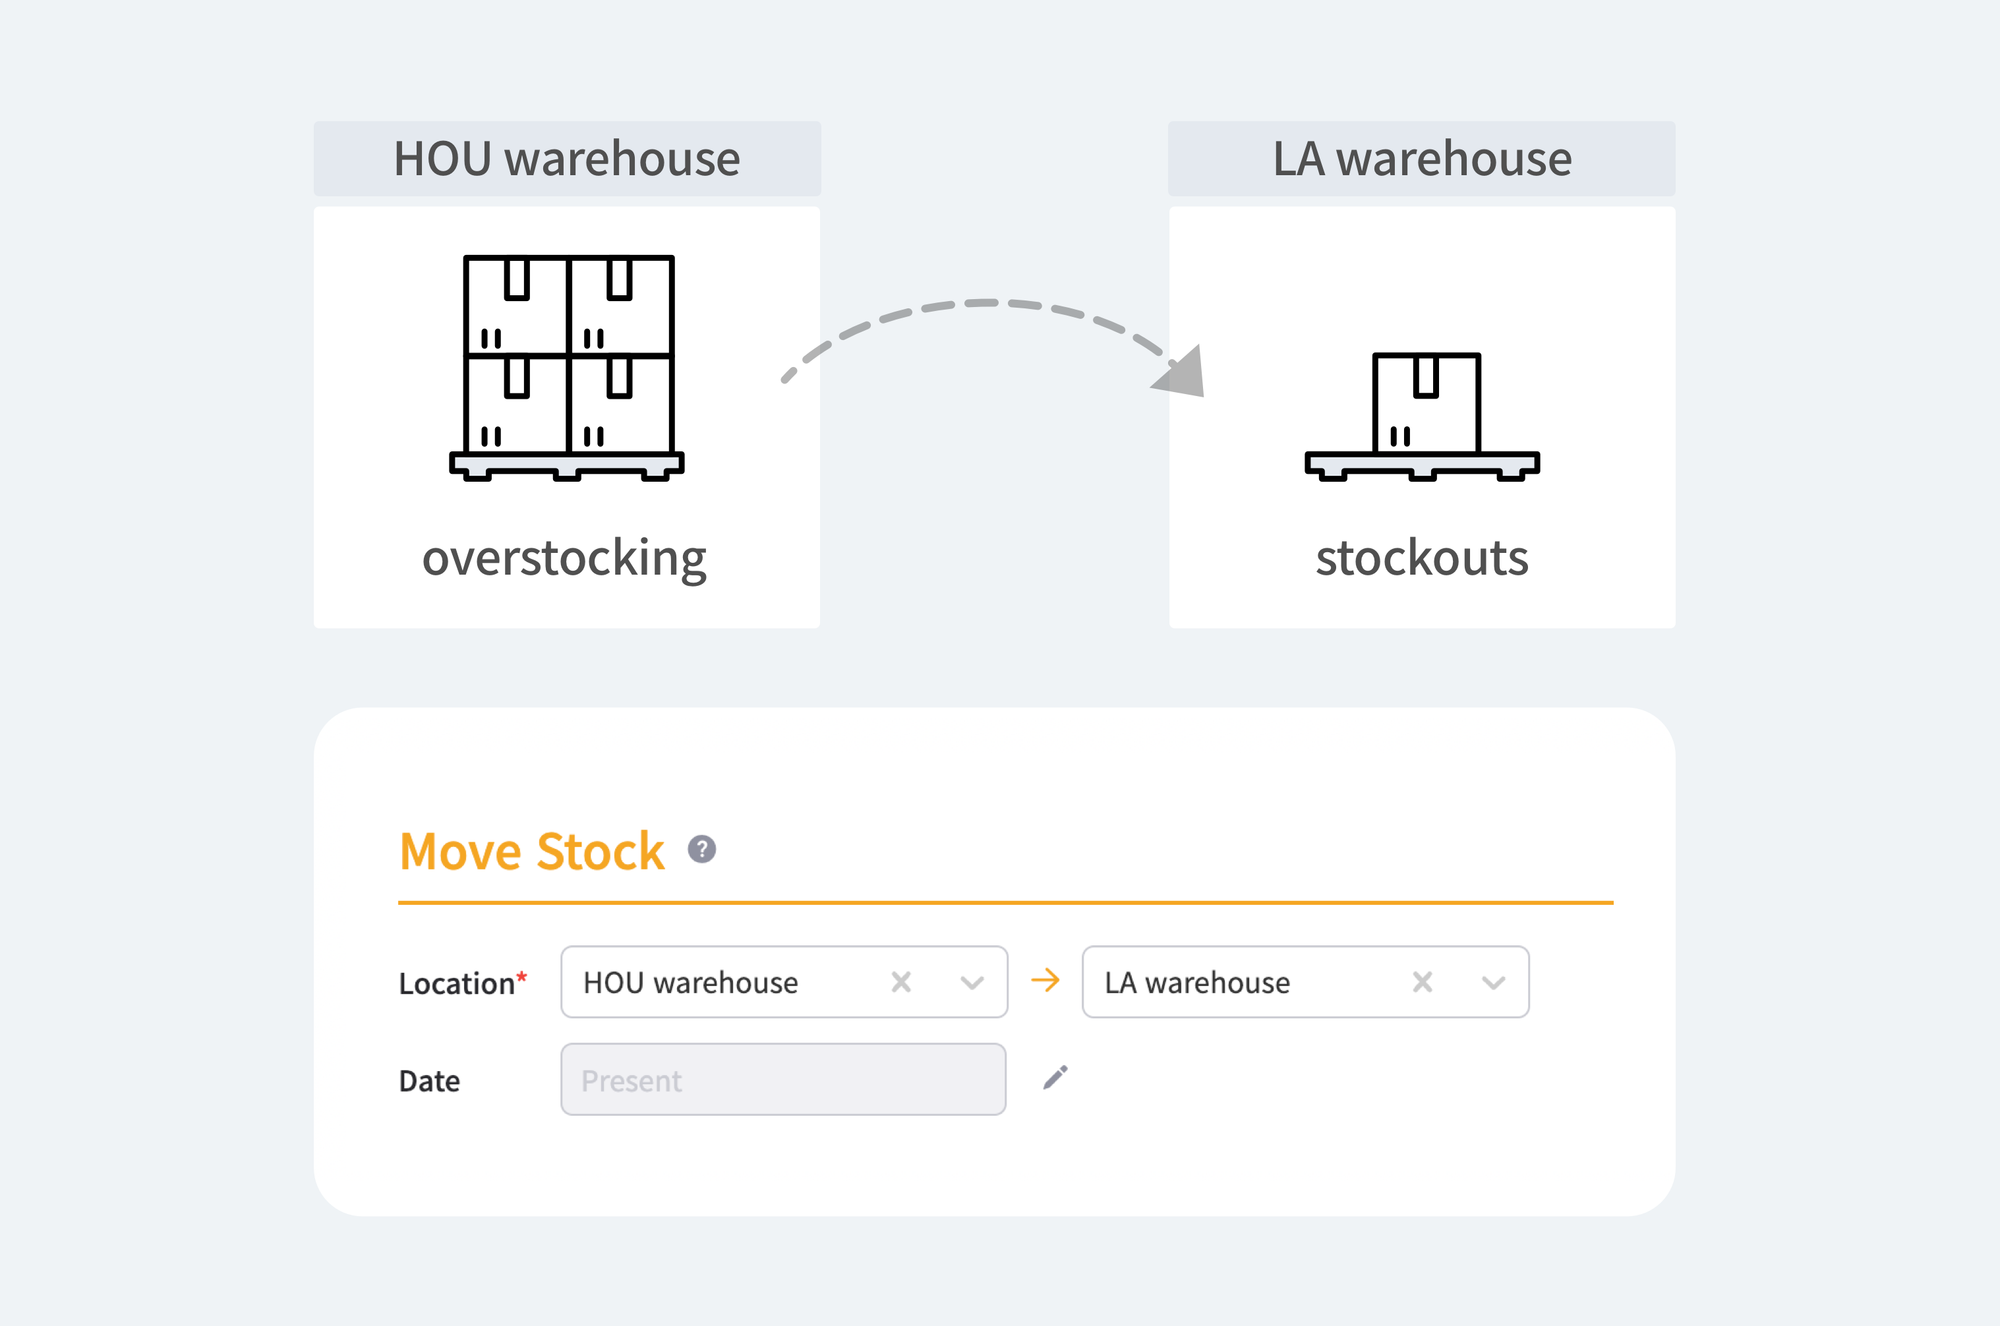 An infographic showing how to "Move [an excessive] Stock" from Houston warehouse to LA warehouse